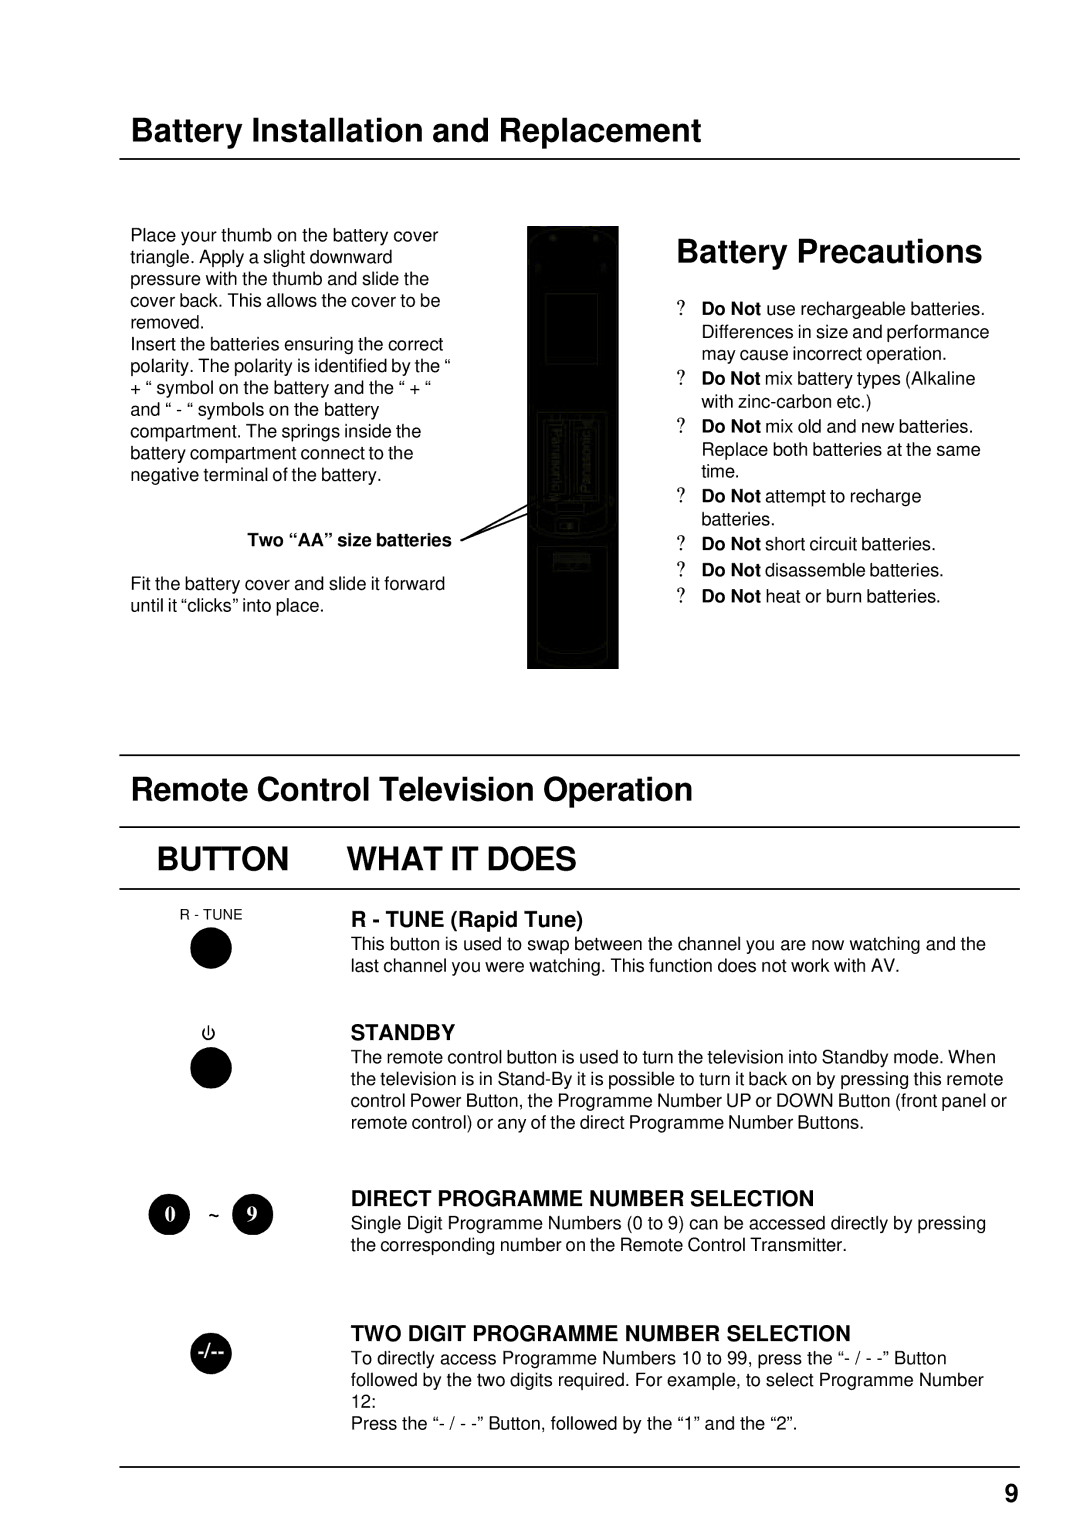 Panasonic TX-68PS12A manual Battery Installation and Replacement, Battery Precautions, Remote Control Television Operation 